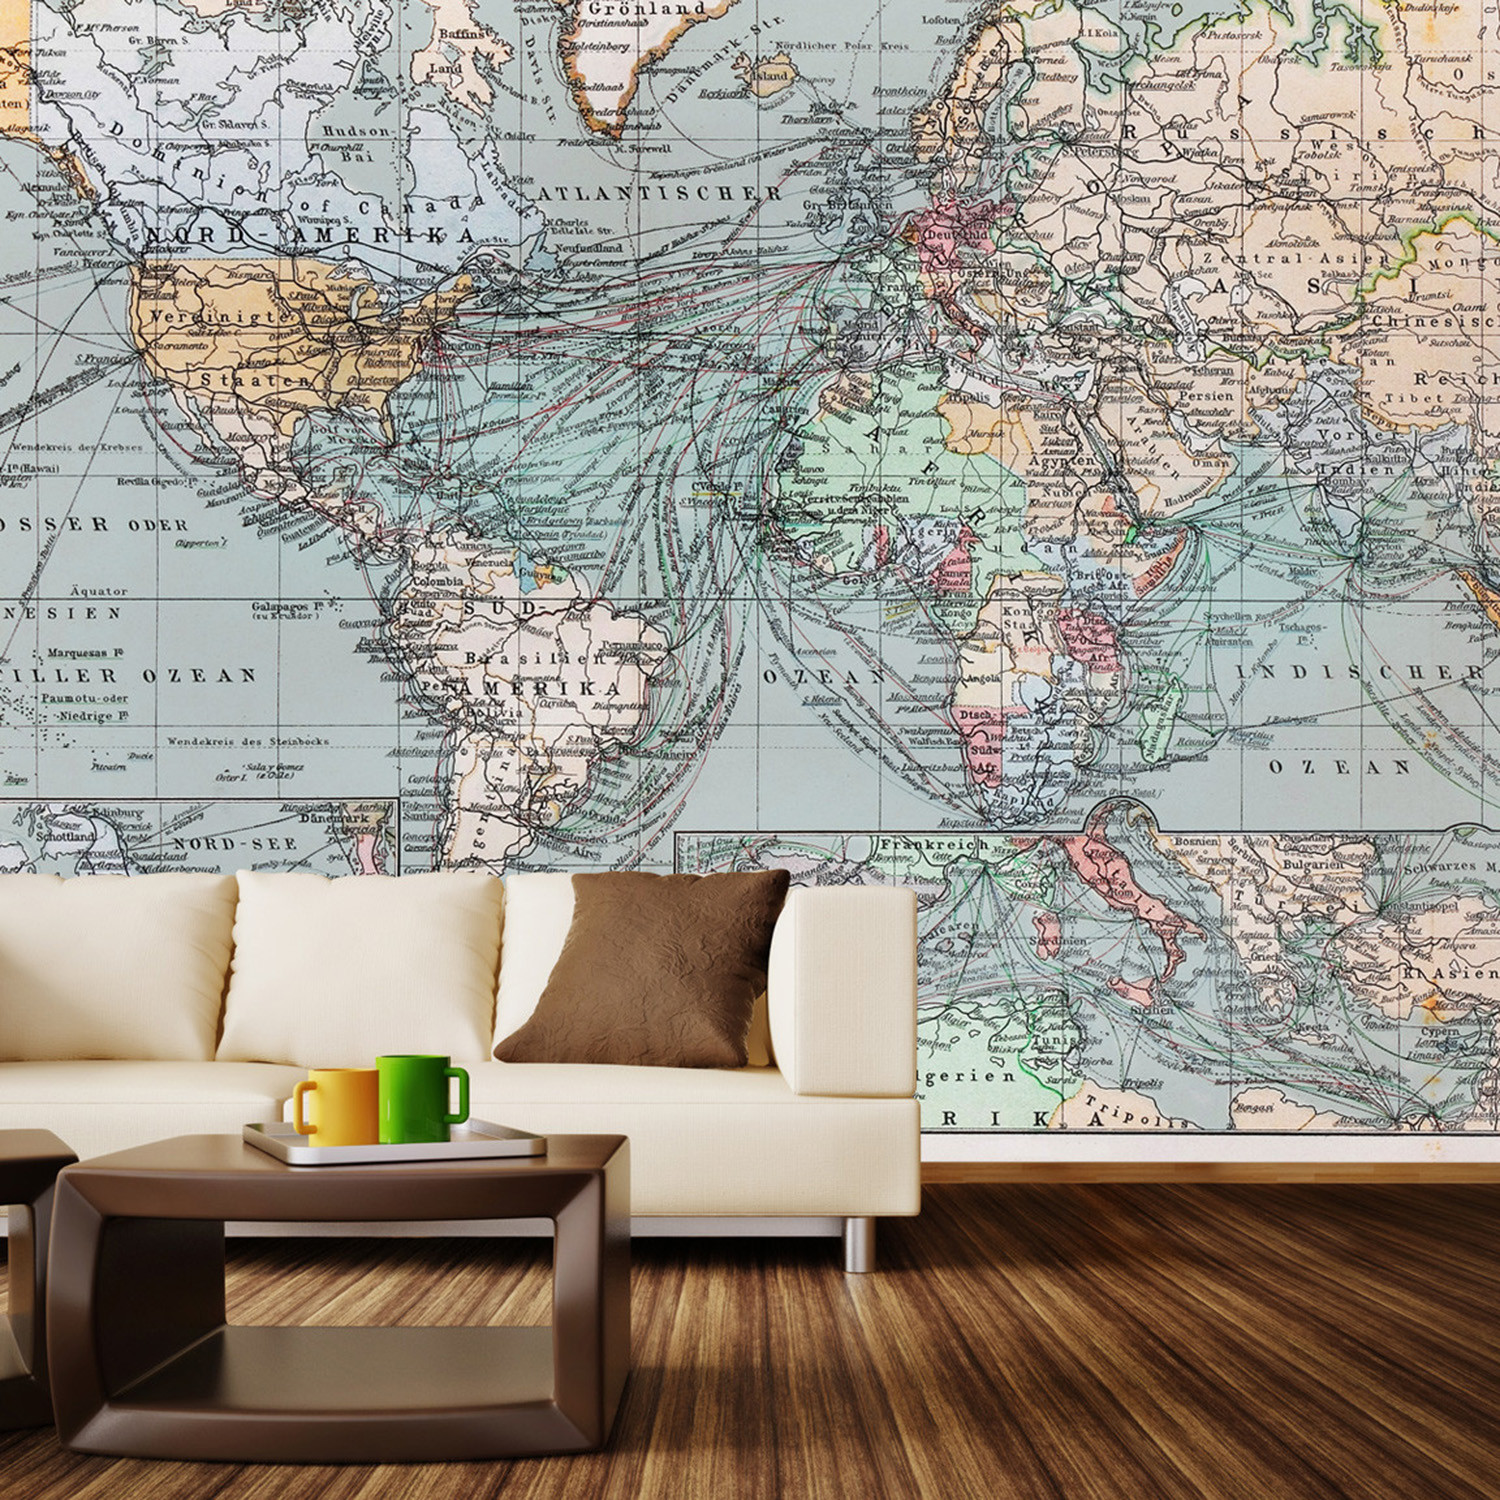 Vintage World Map Wall Mural Decal 4 Panels 93" Width